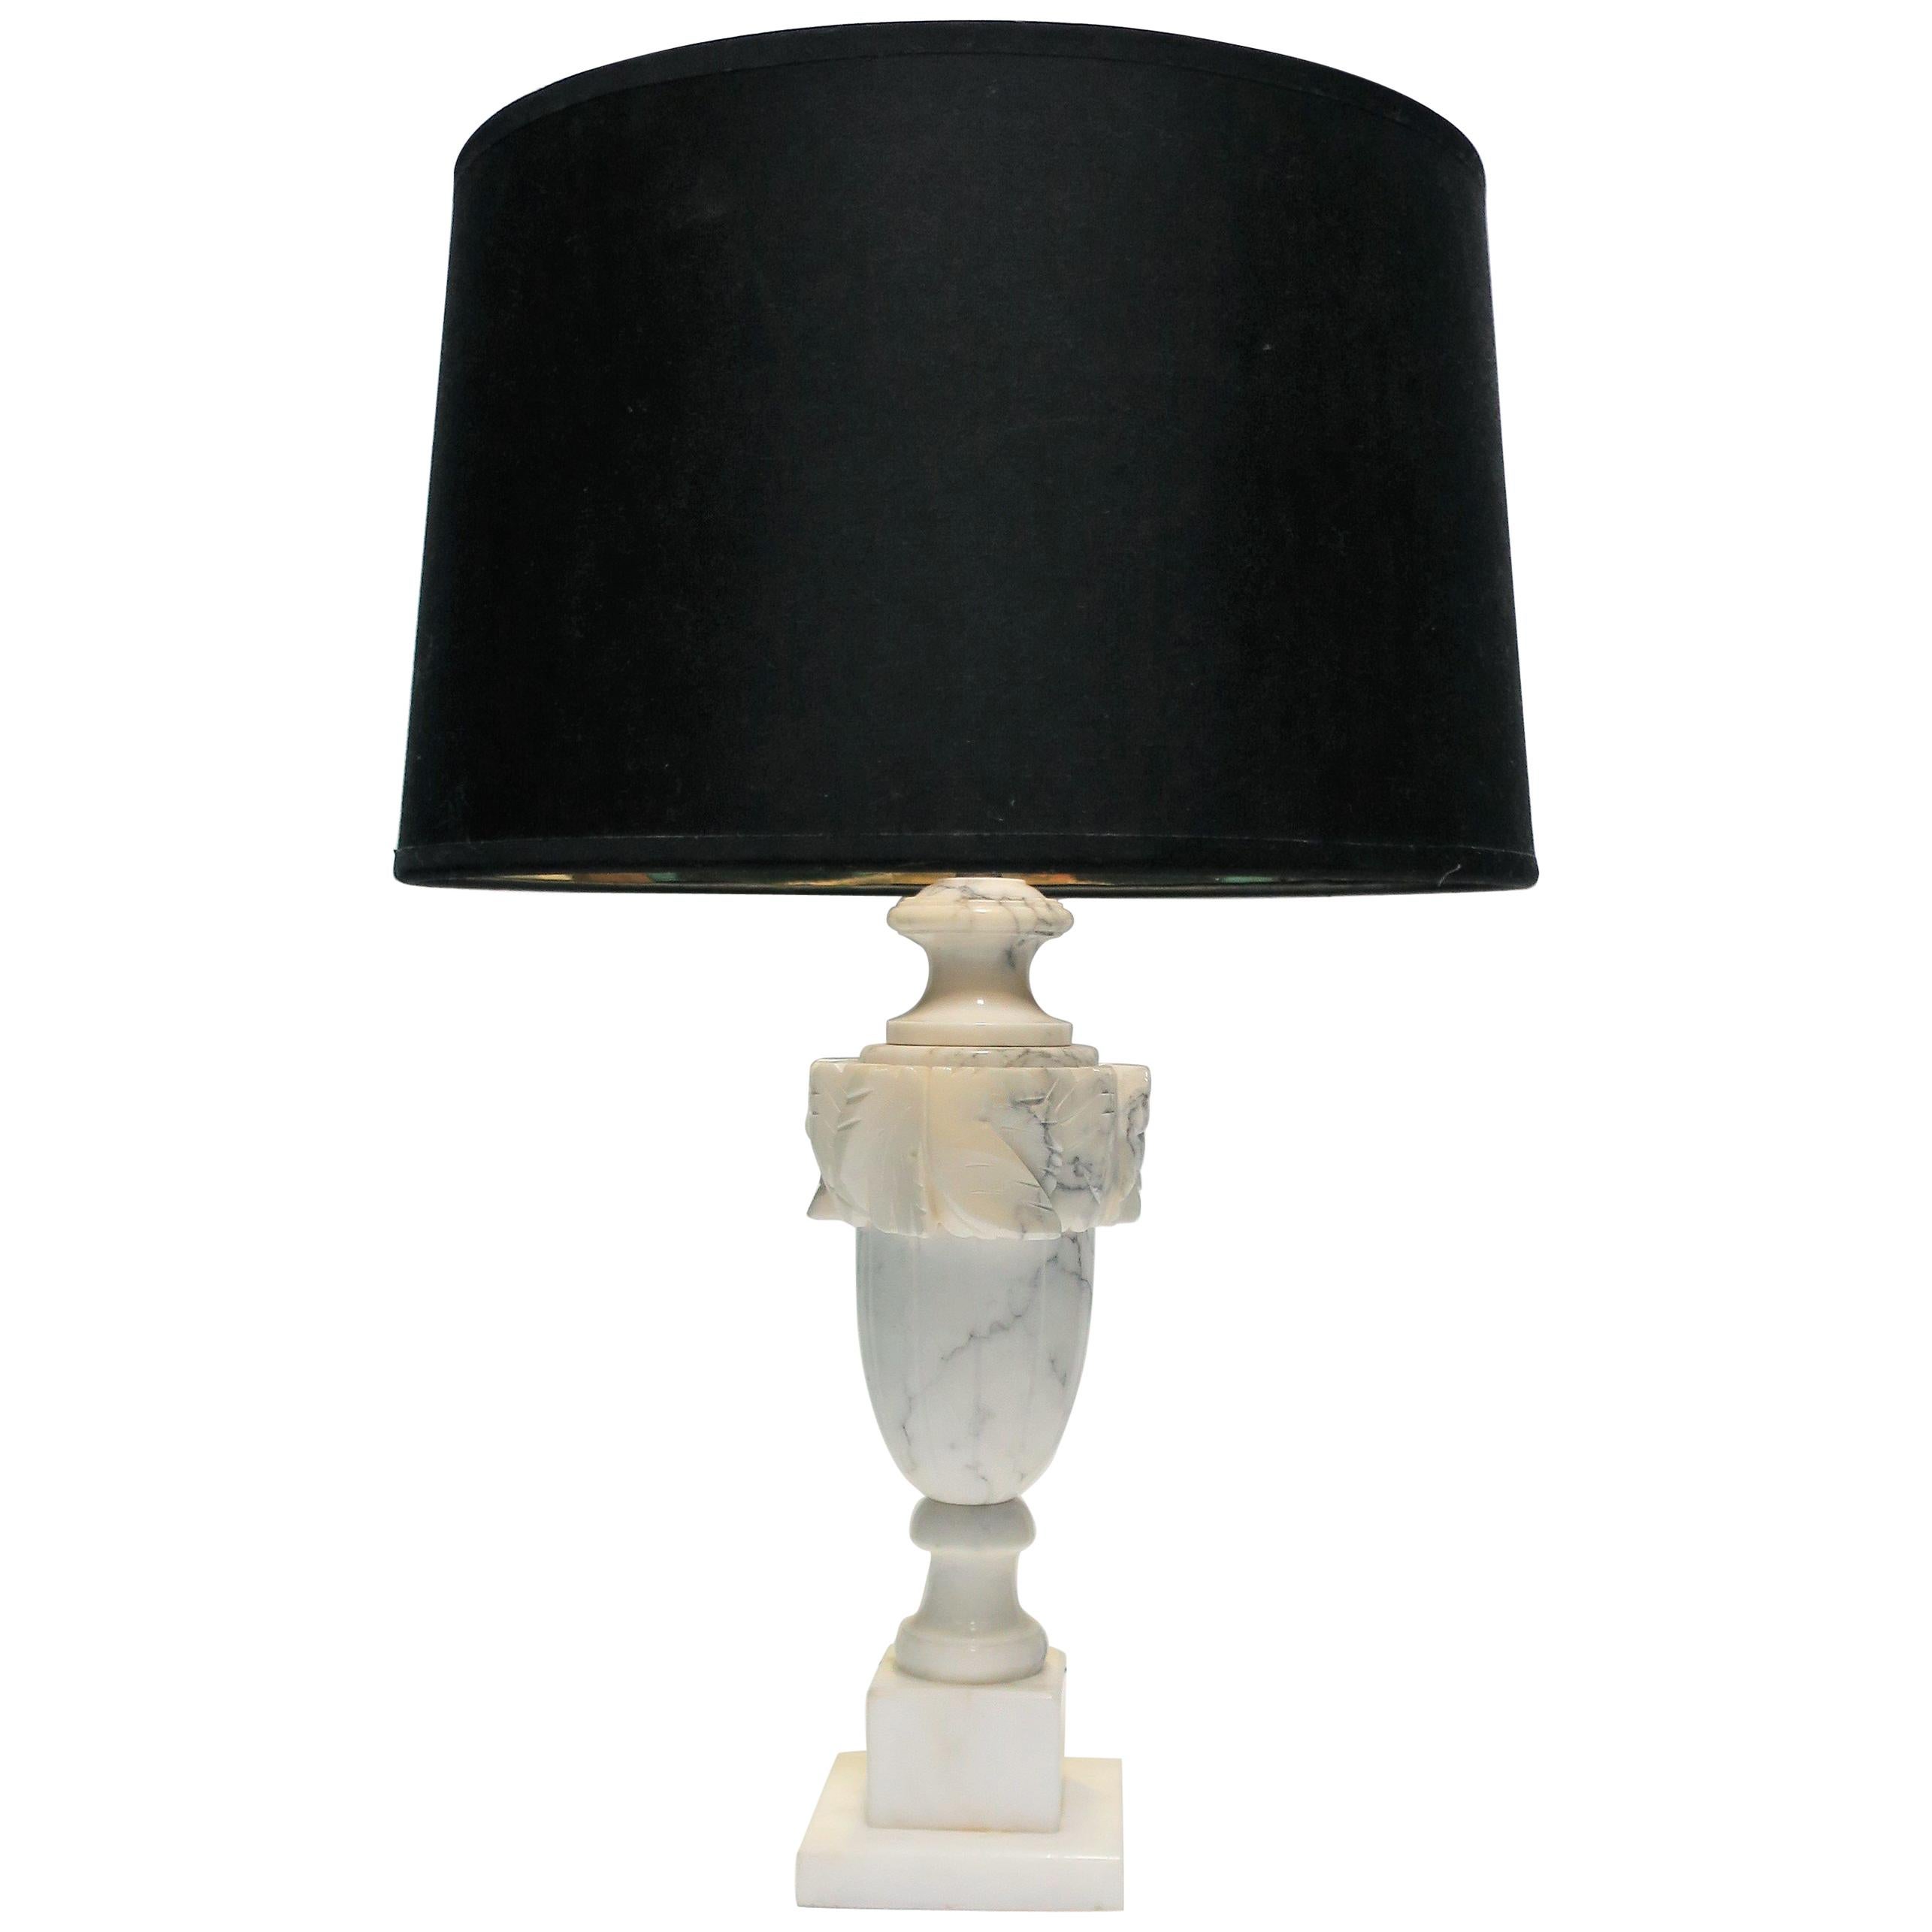 Italian Neoclassical Solid Black and White Marble Urn Table Lamp